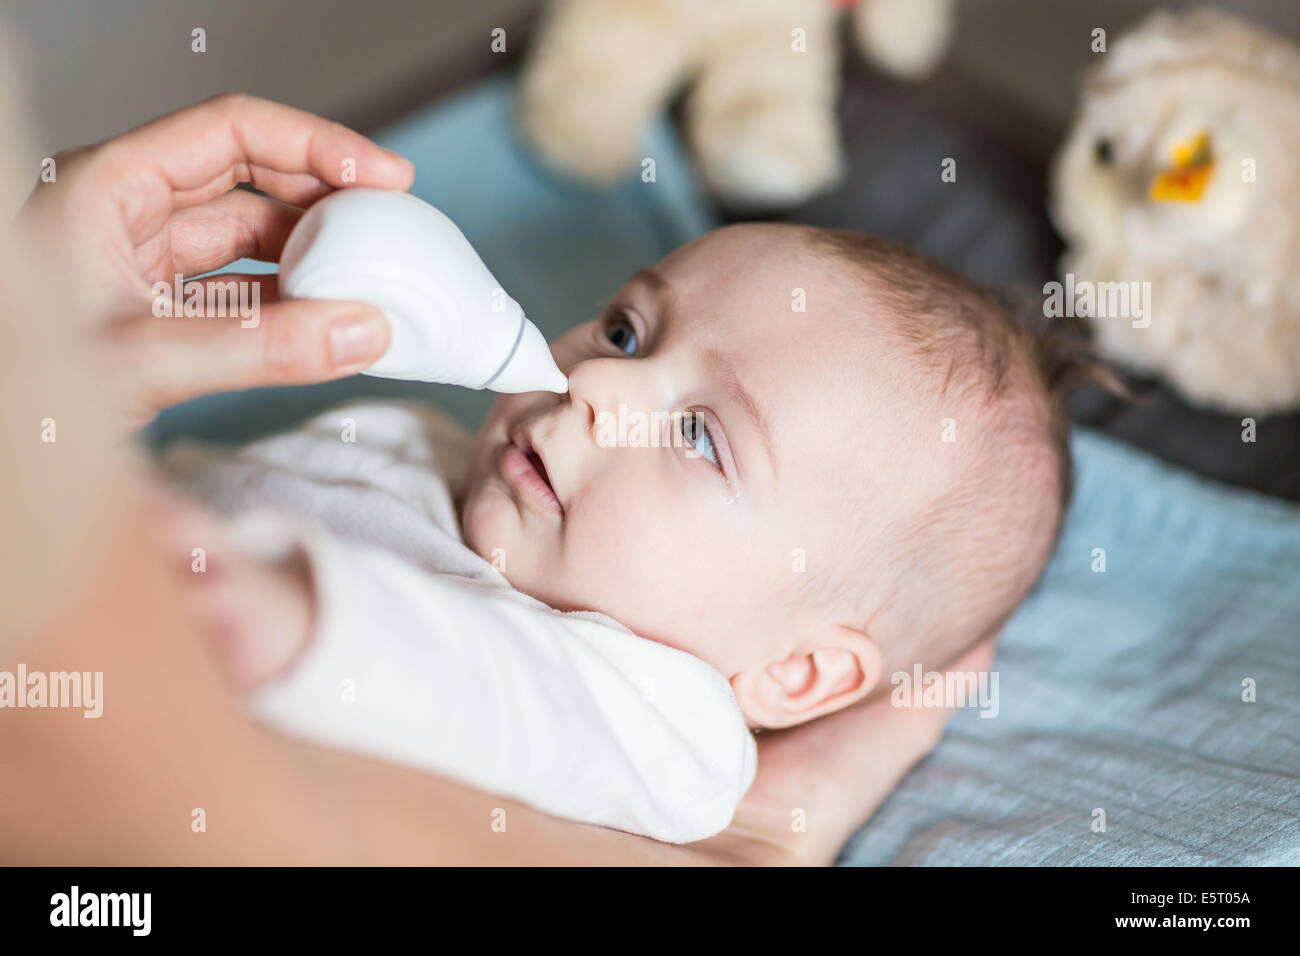 4 months old baby boy having his nose cleared with a nose-blower. Stock Photo